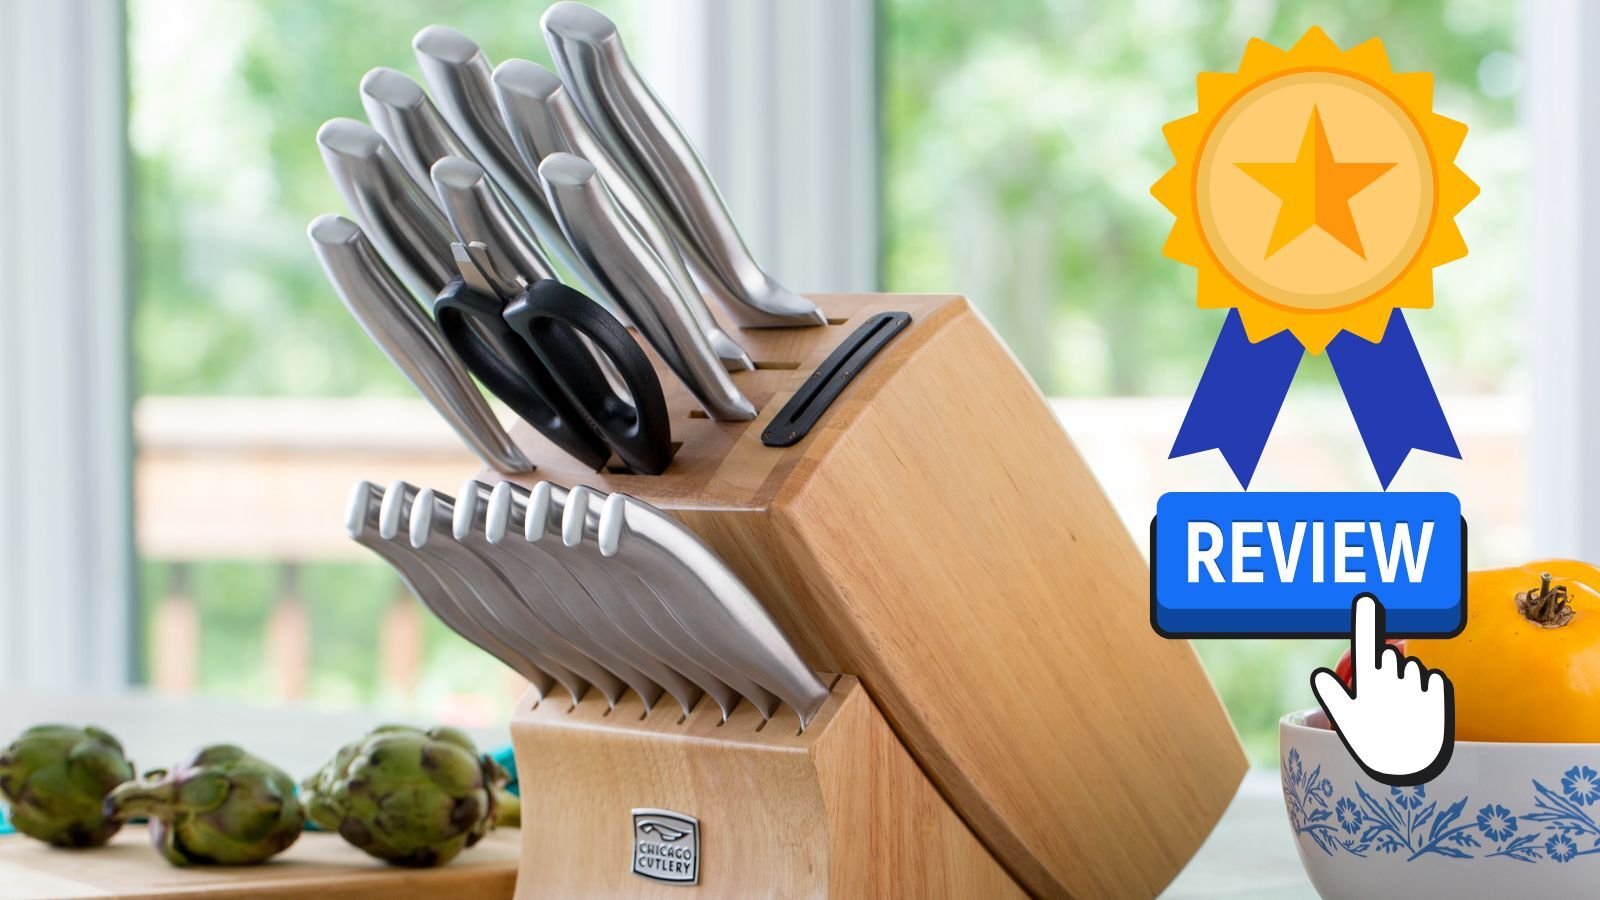 Chicago Cutlery Review: Is It Really offer Affordable, High-Quality Knives for Chefs and Home Cooks Alike?